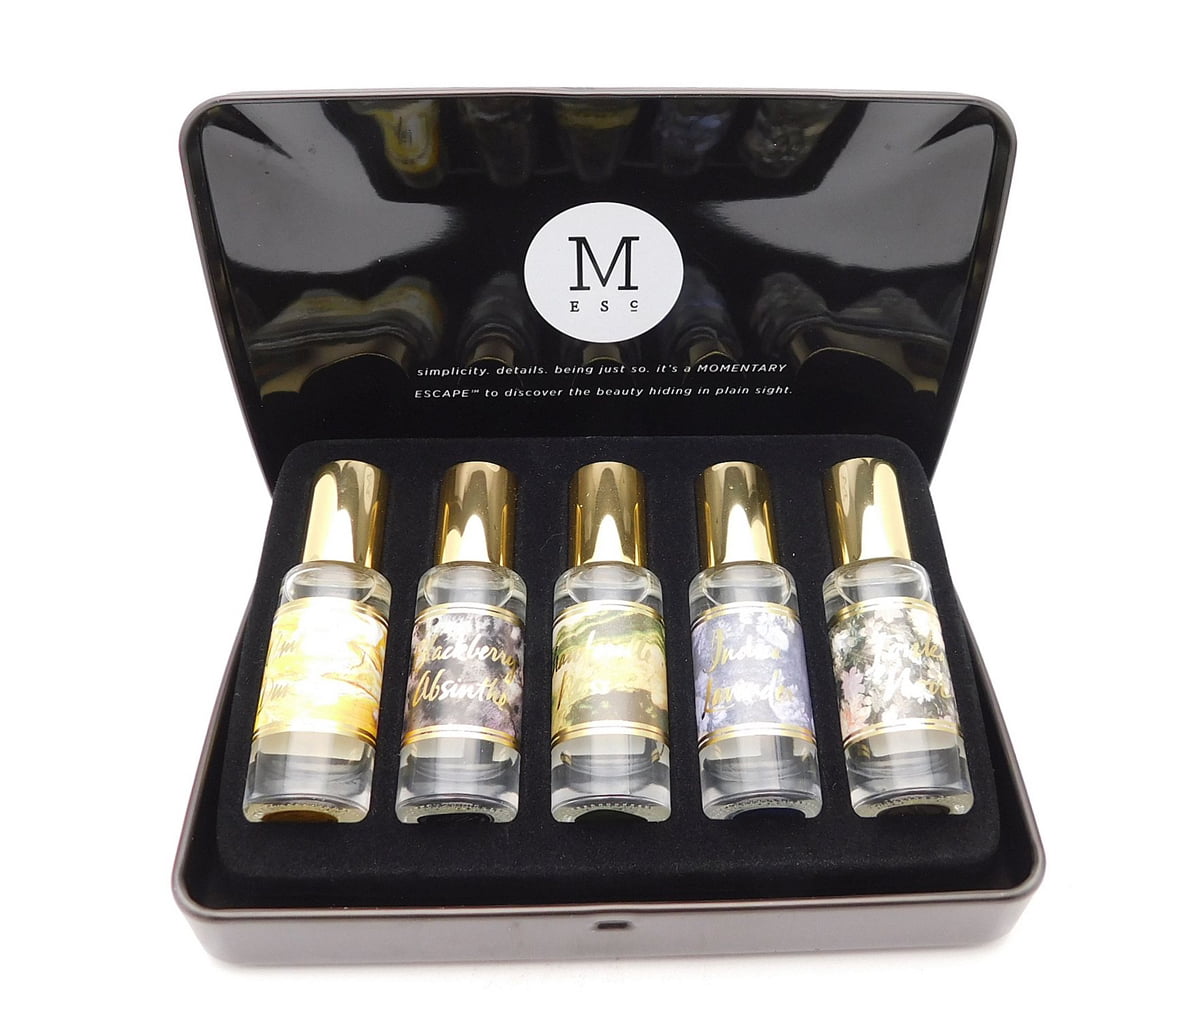 7 In 1 Perfume Set 10ml Rose Etoile Filante/ Cceur Battant/ Attrape Reves/  Matiere Noire/ Le Jour Se Leve/ Heures Dabsence 10mlx7 Perfume Kit Gift  Free Delivery From Fjn012, $47.39